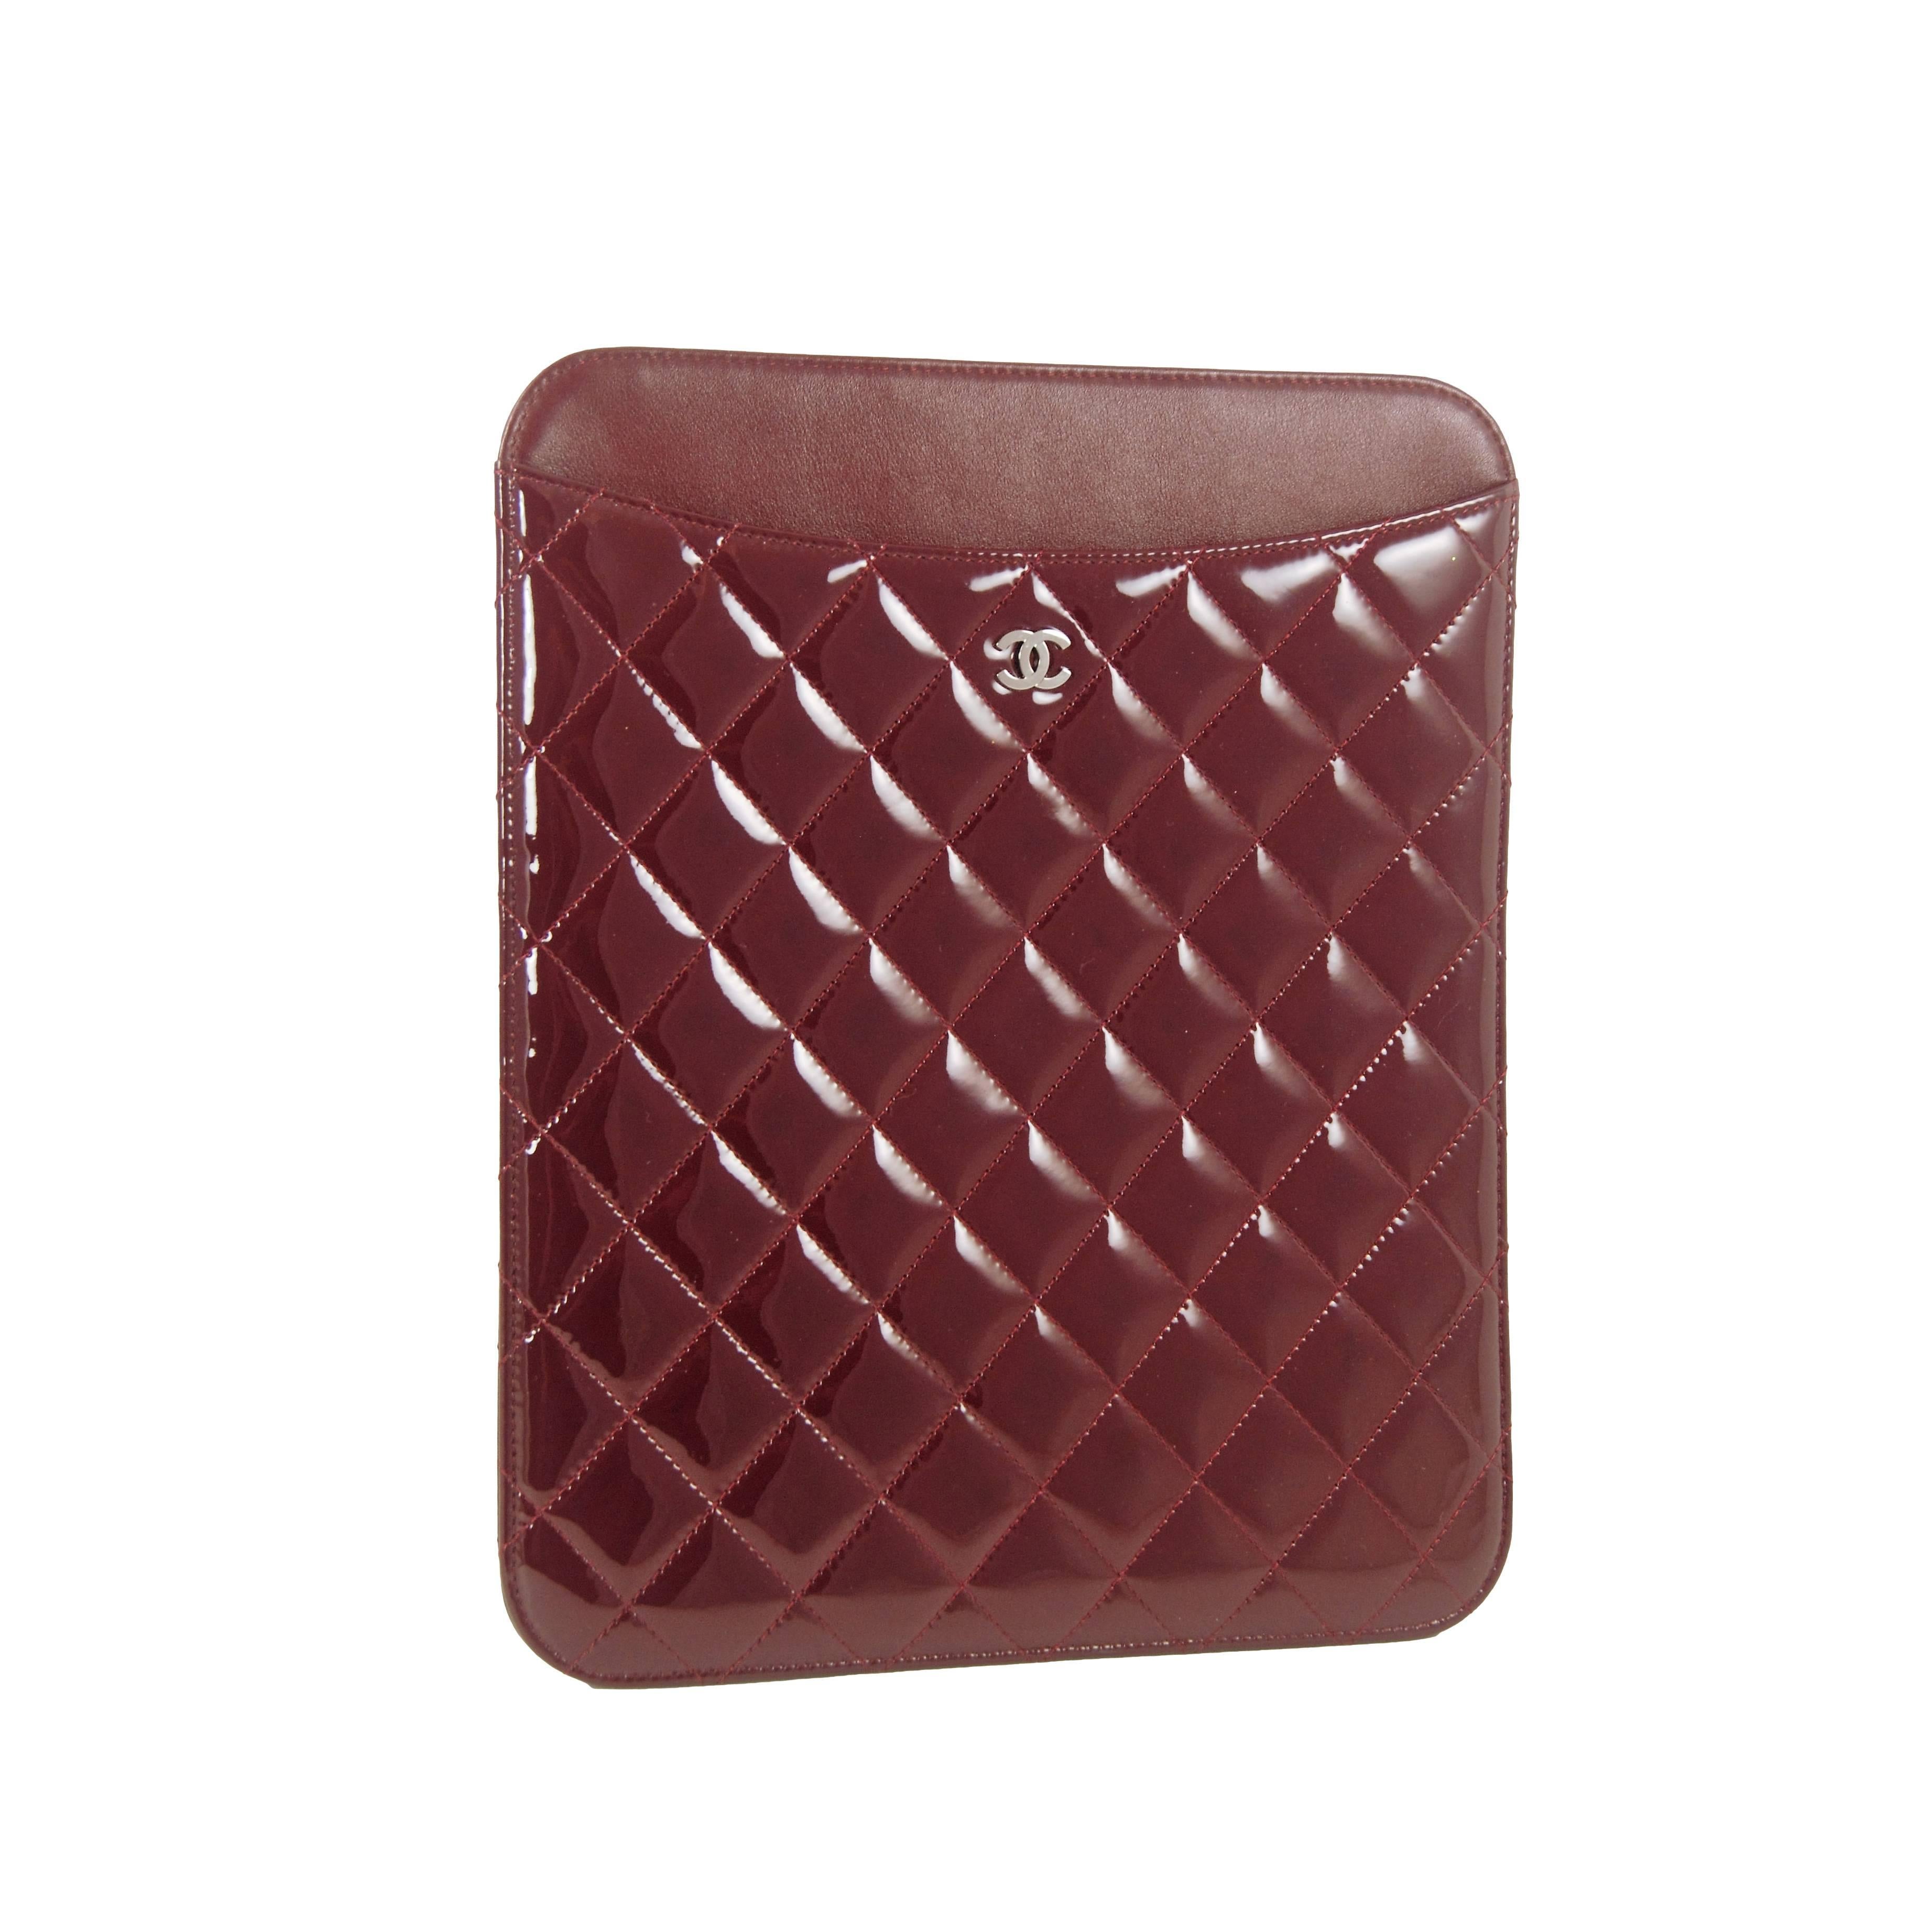 2011 Chanel Burgundy Patent Leather iPad Case For Sale